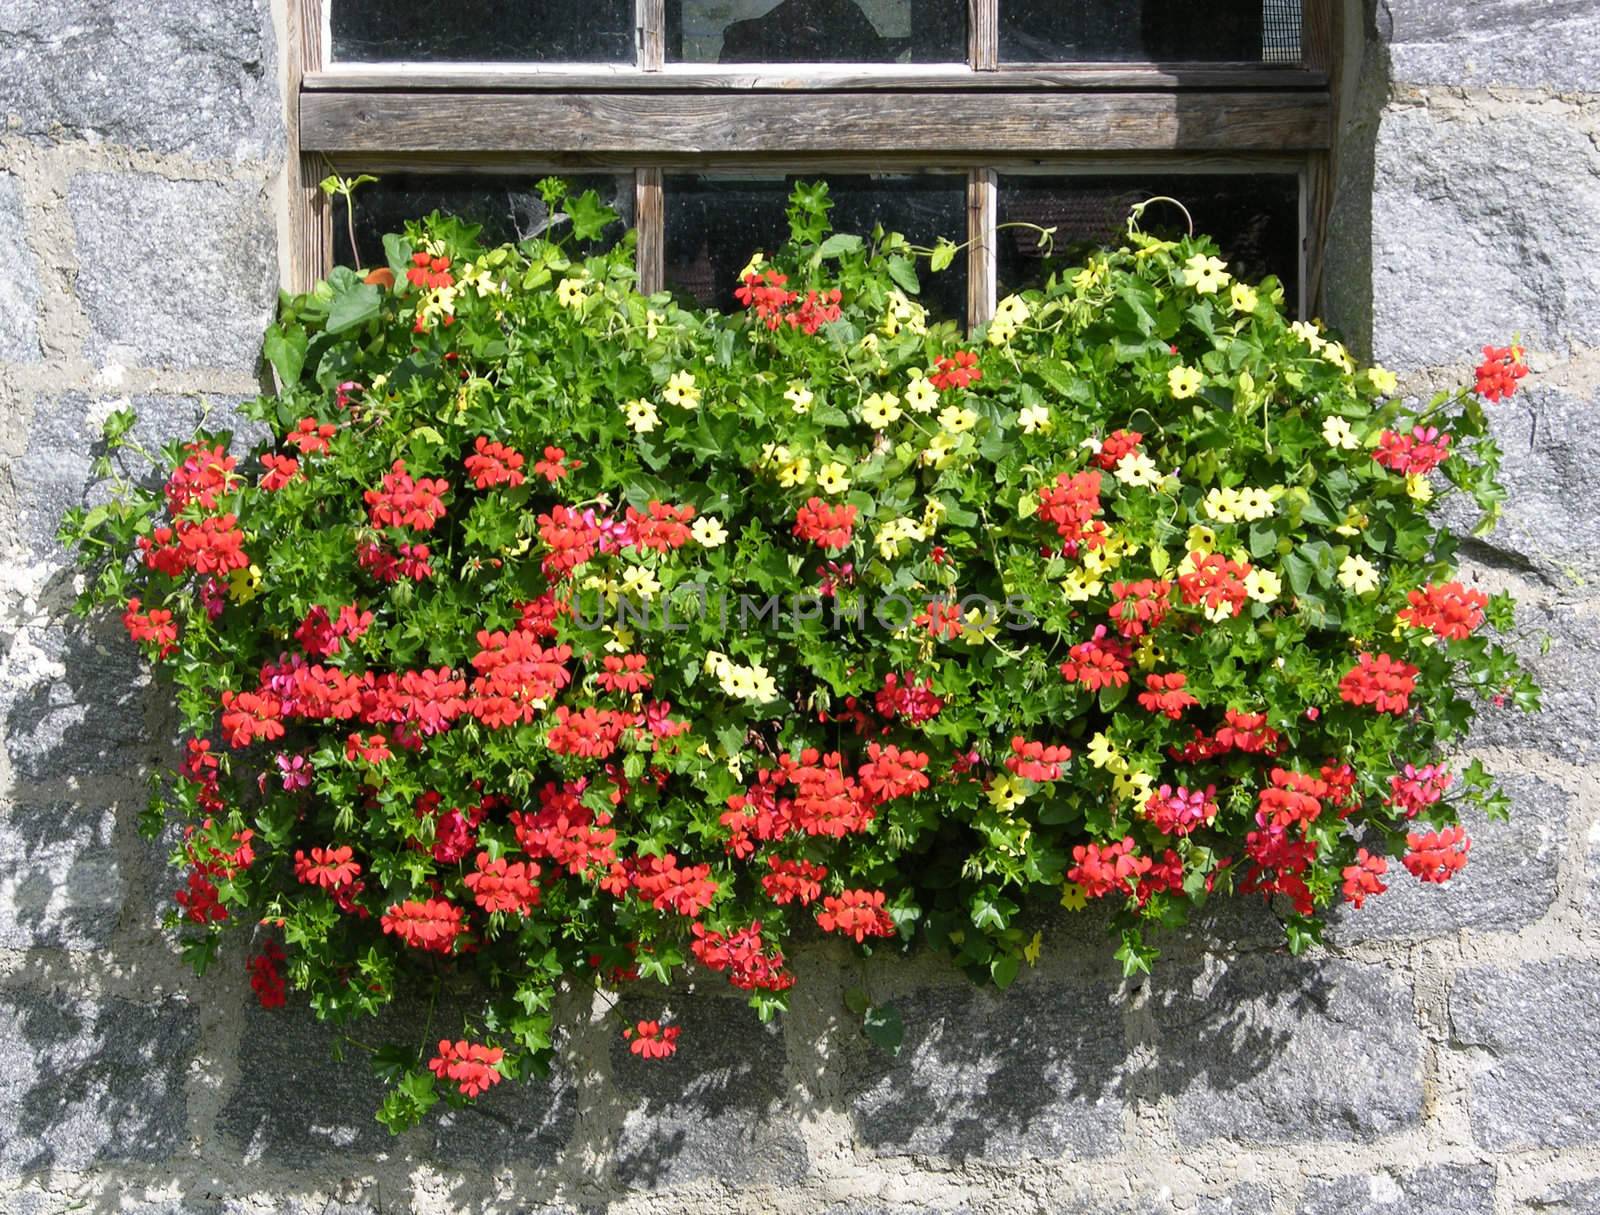 Geranium flowers in front of a traditional farmhouse in Bavaria